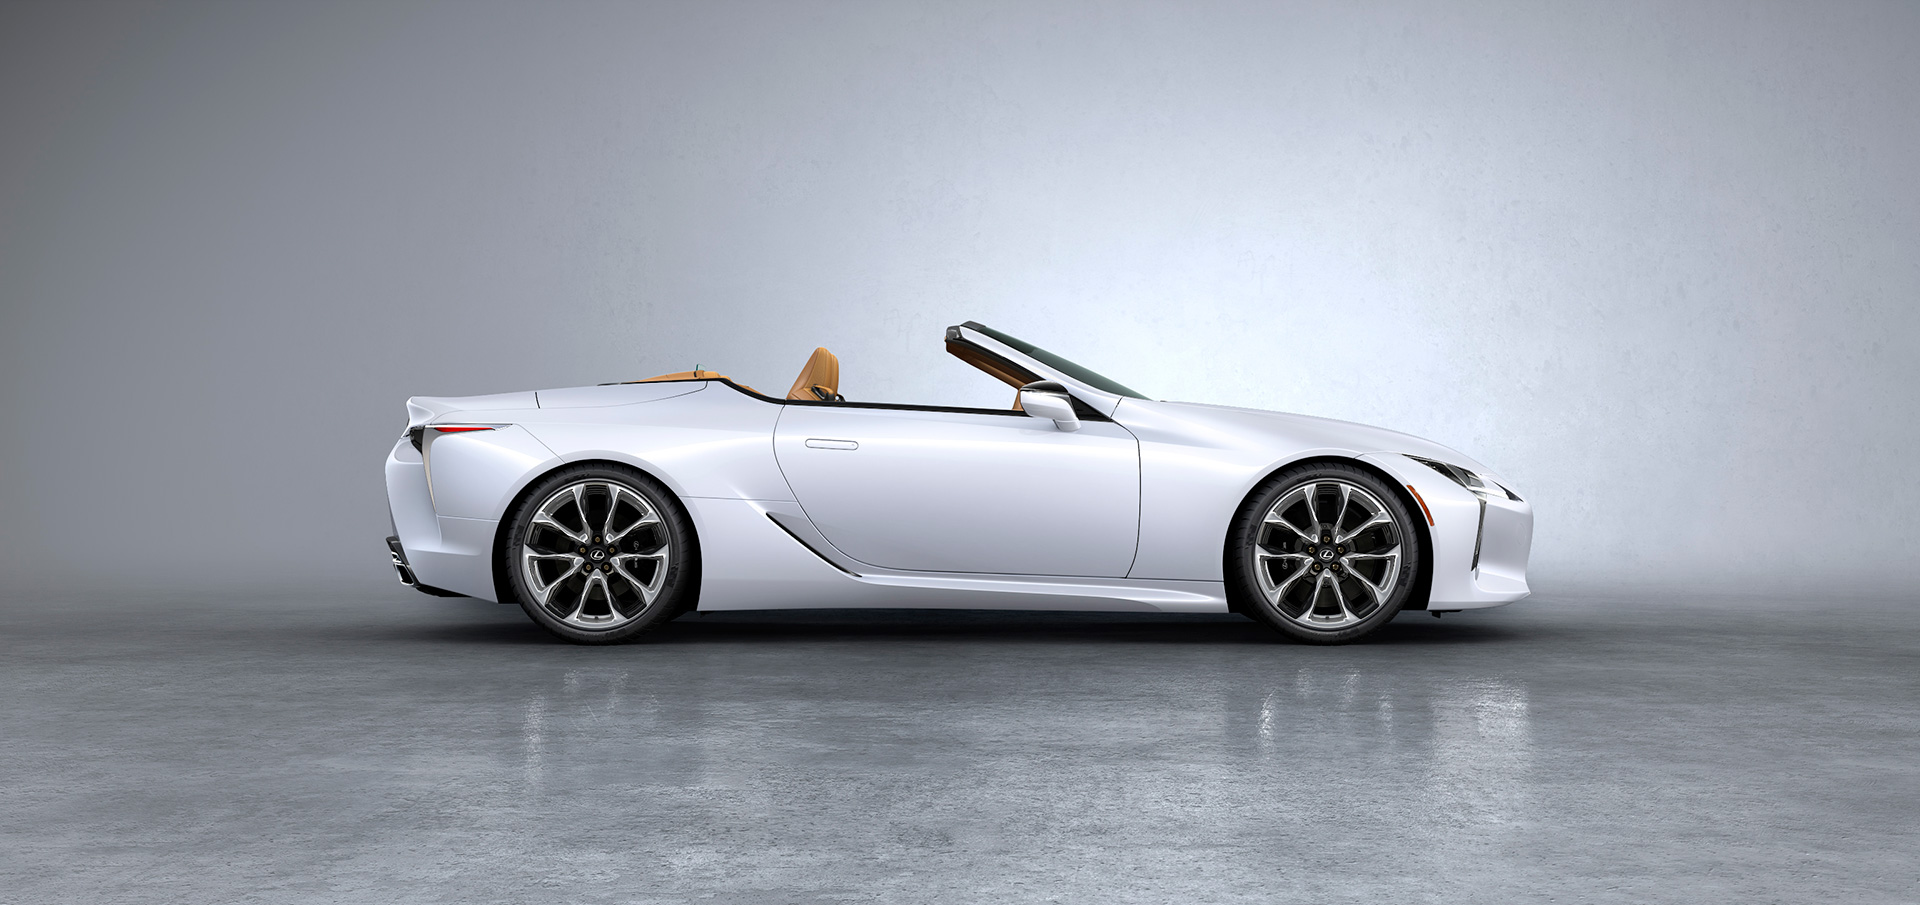 The Stunning Lexus Lc 500 Convertible Makes Its Global Debut At